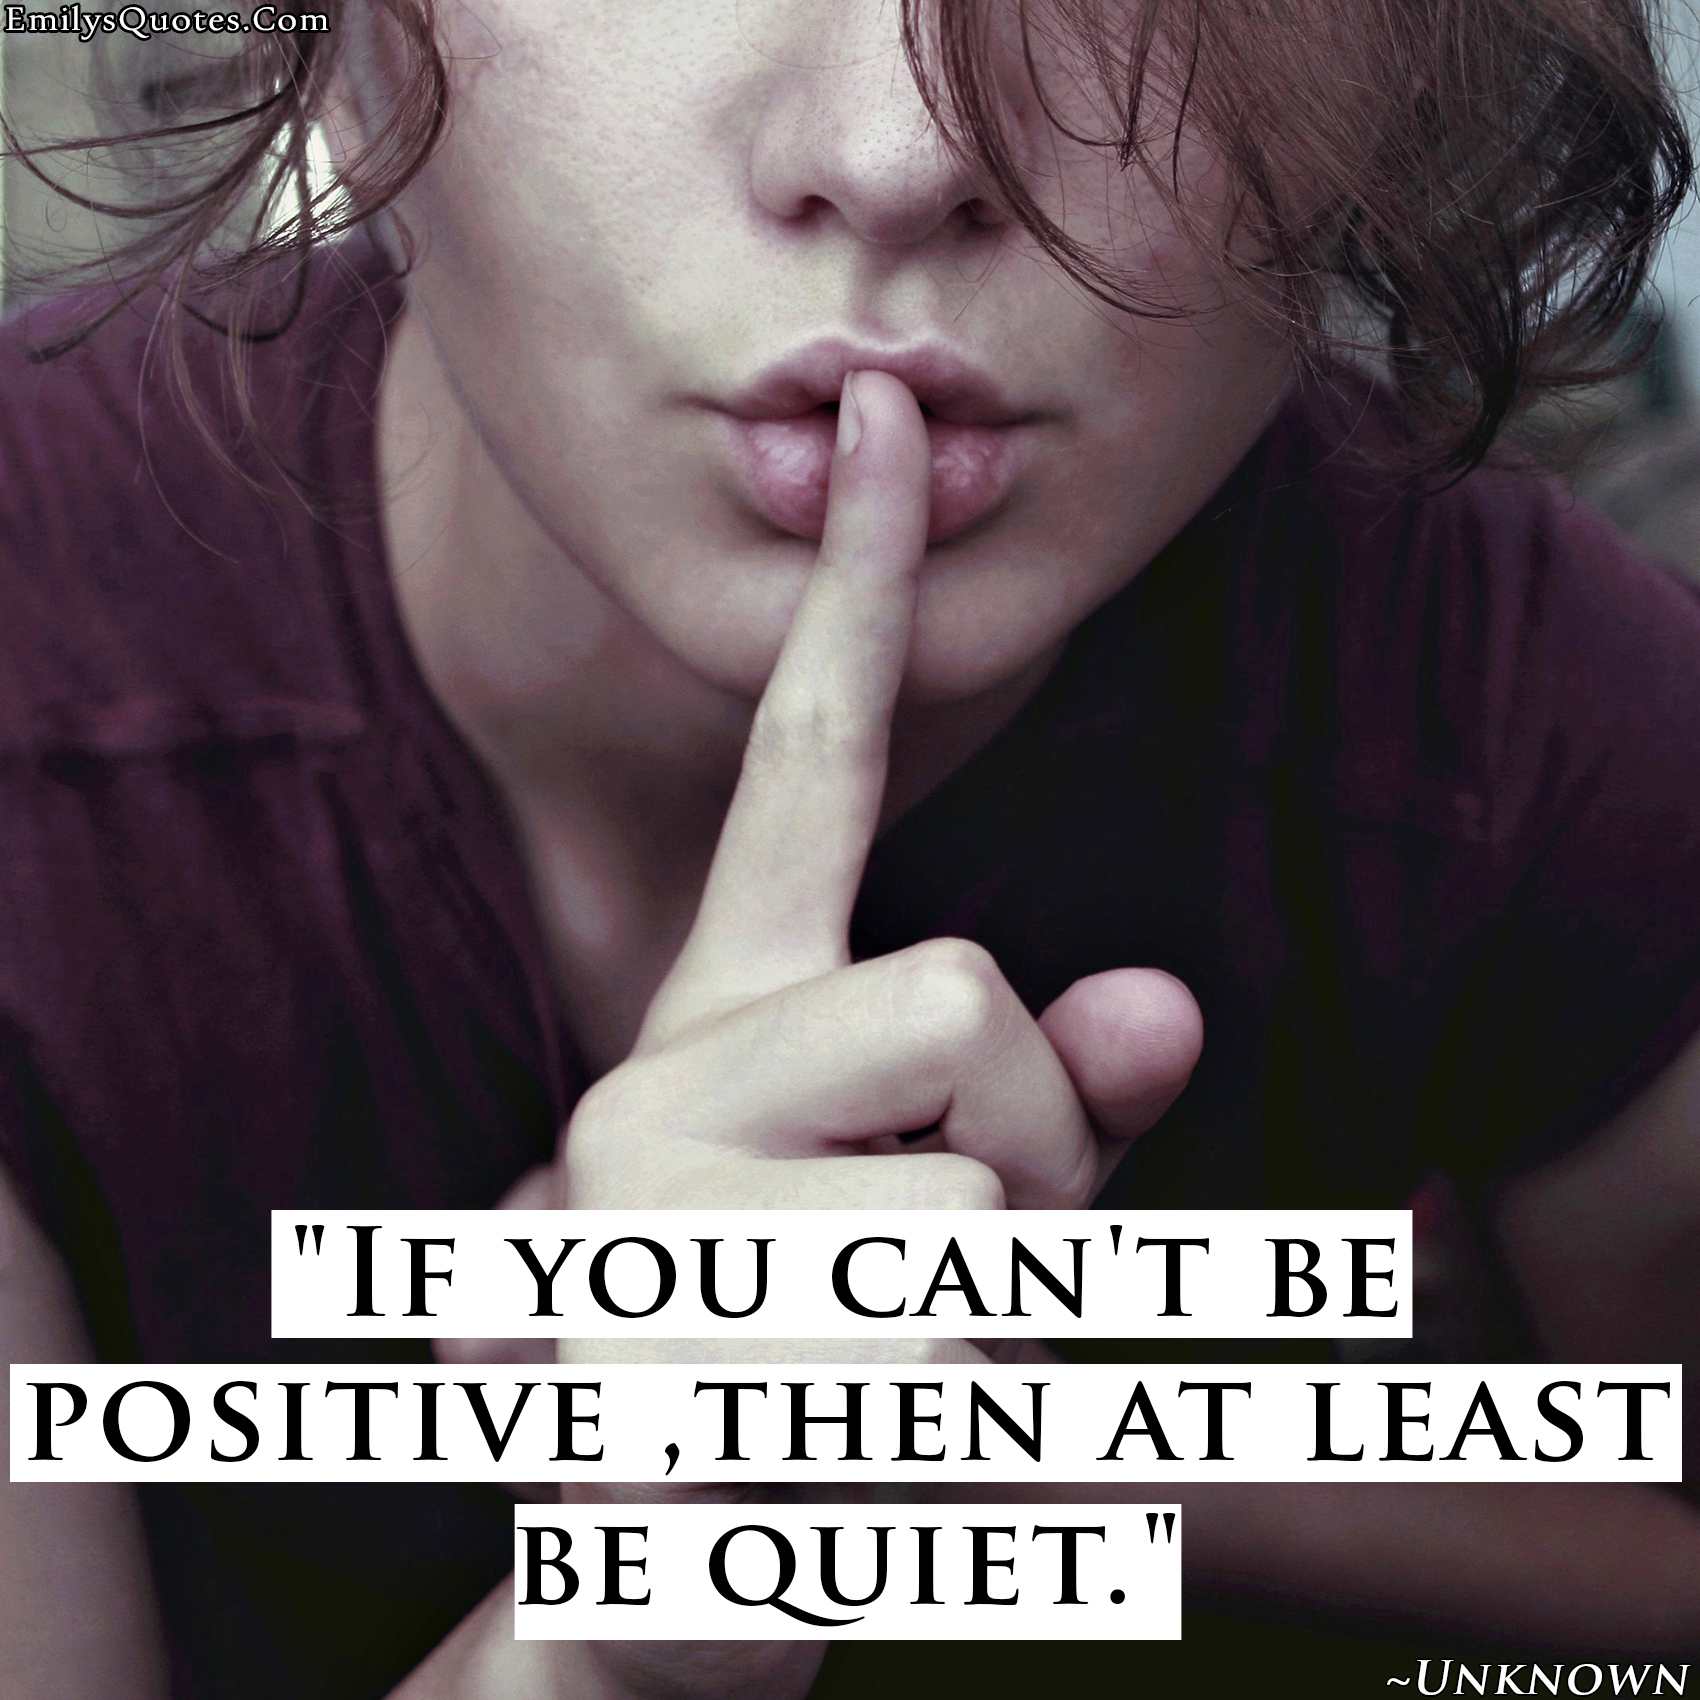 If you can’t be positive, then at least be quiet